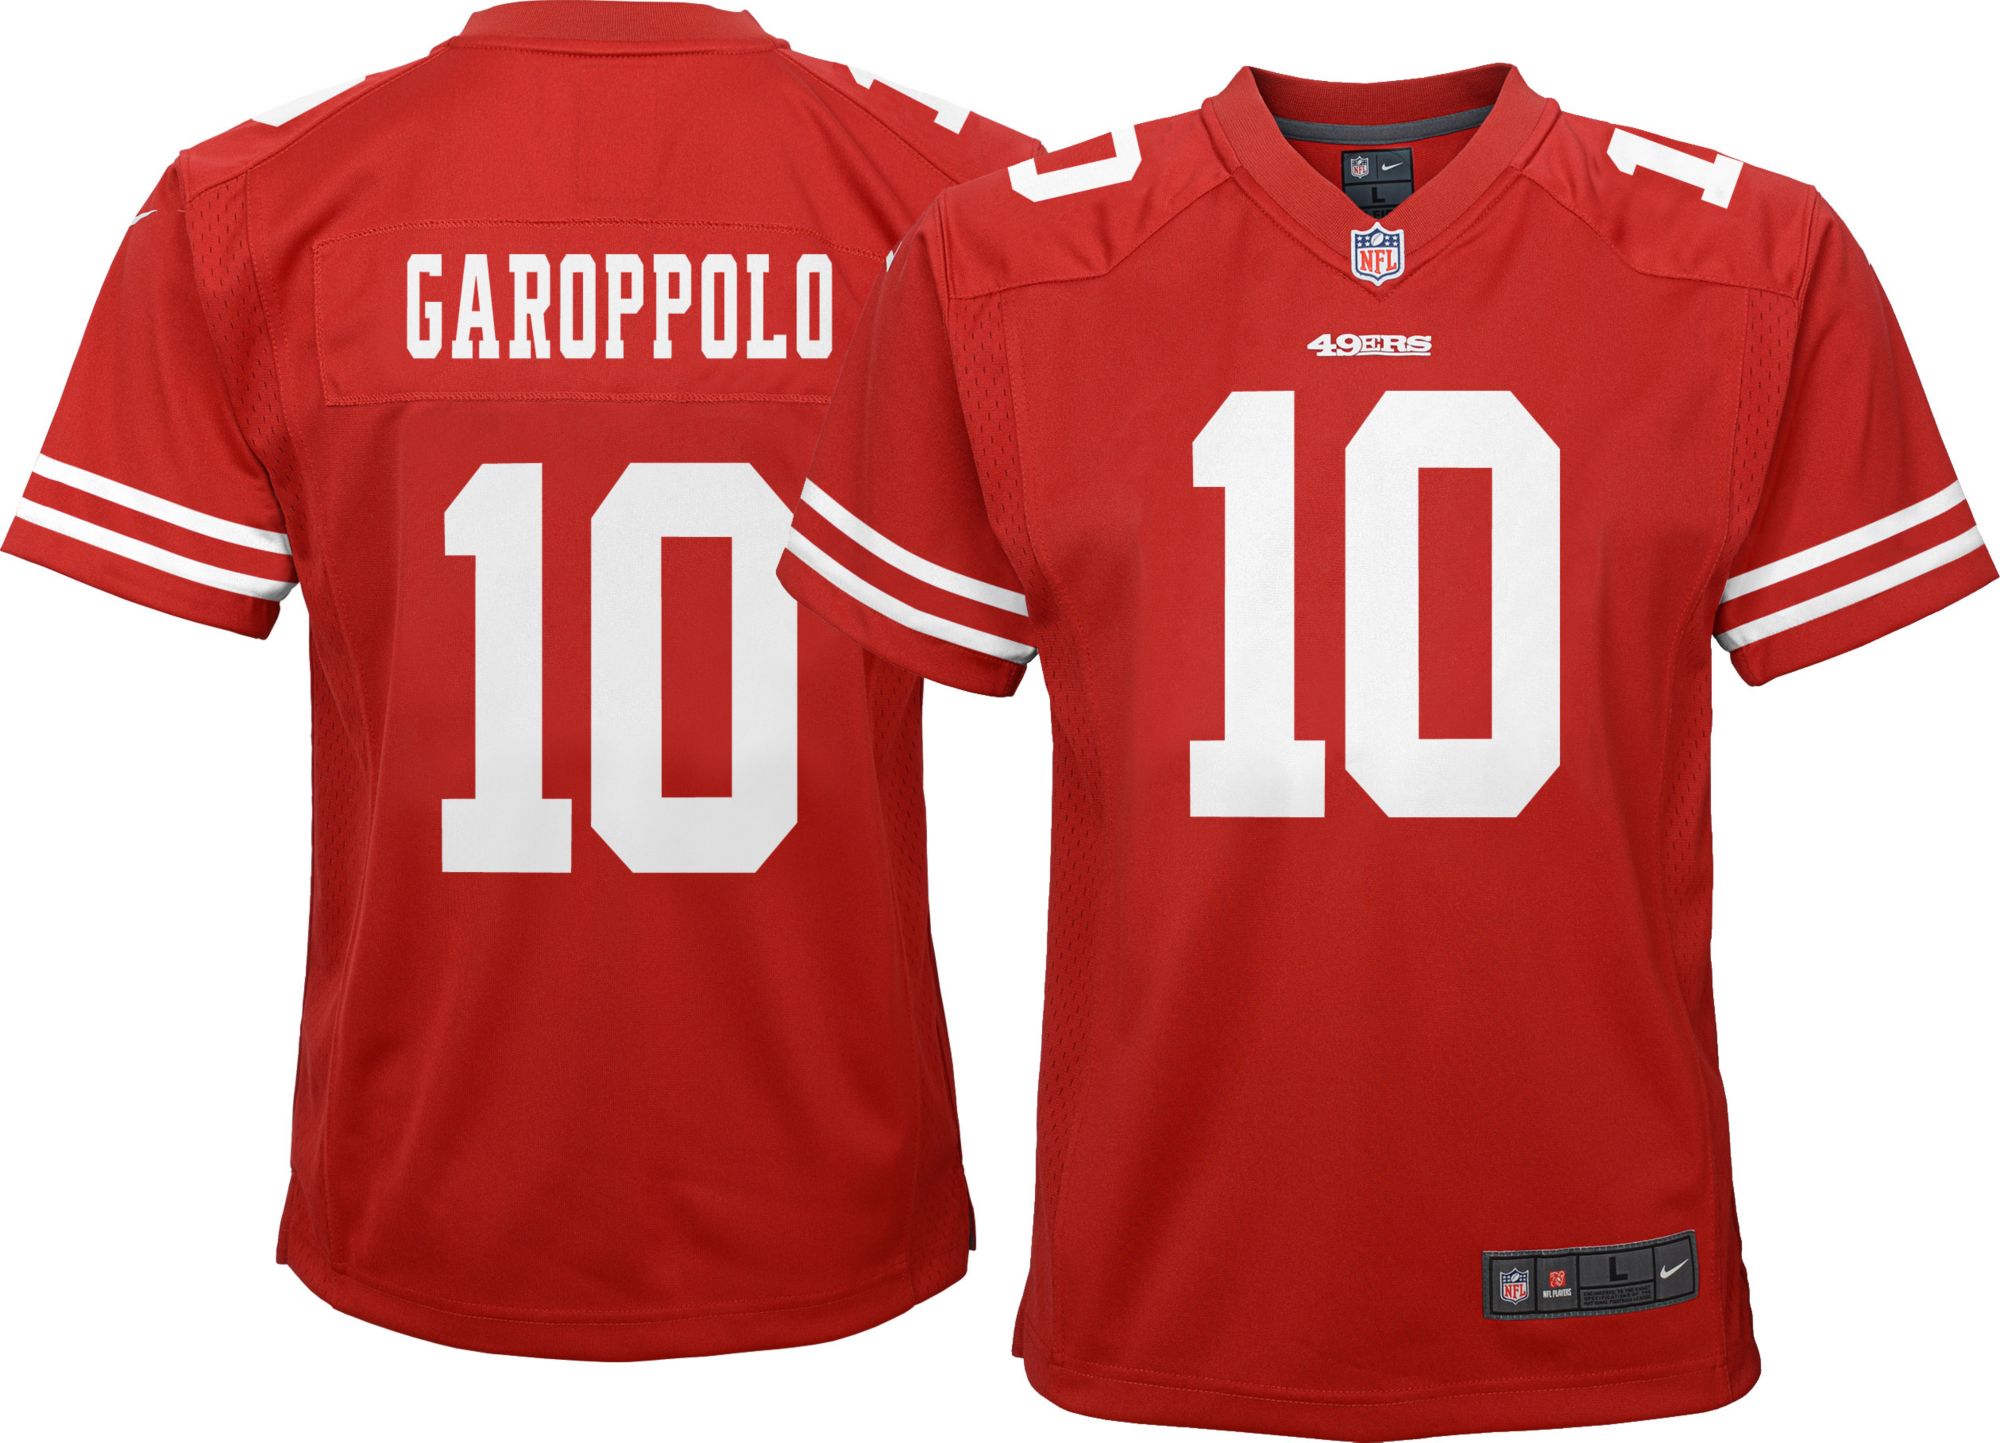 youth 49ers jersey